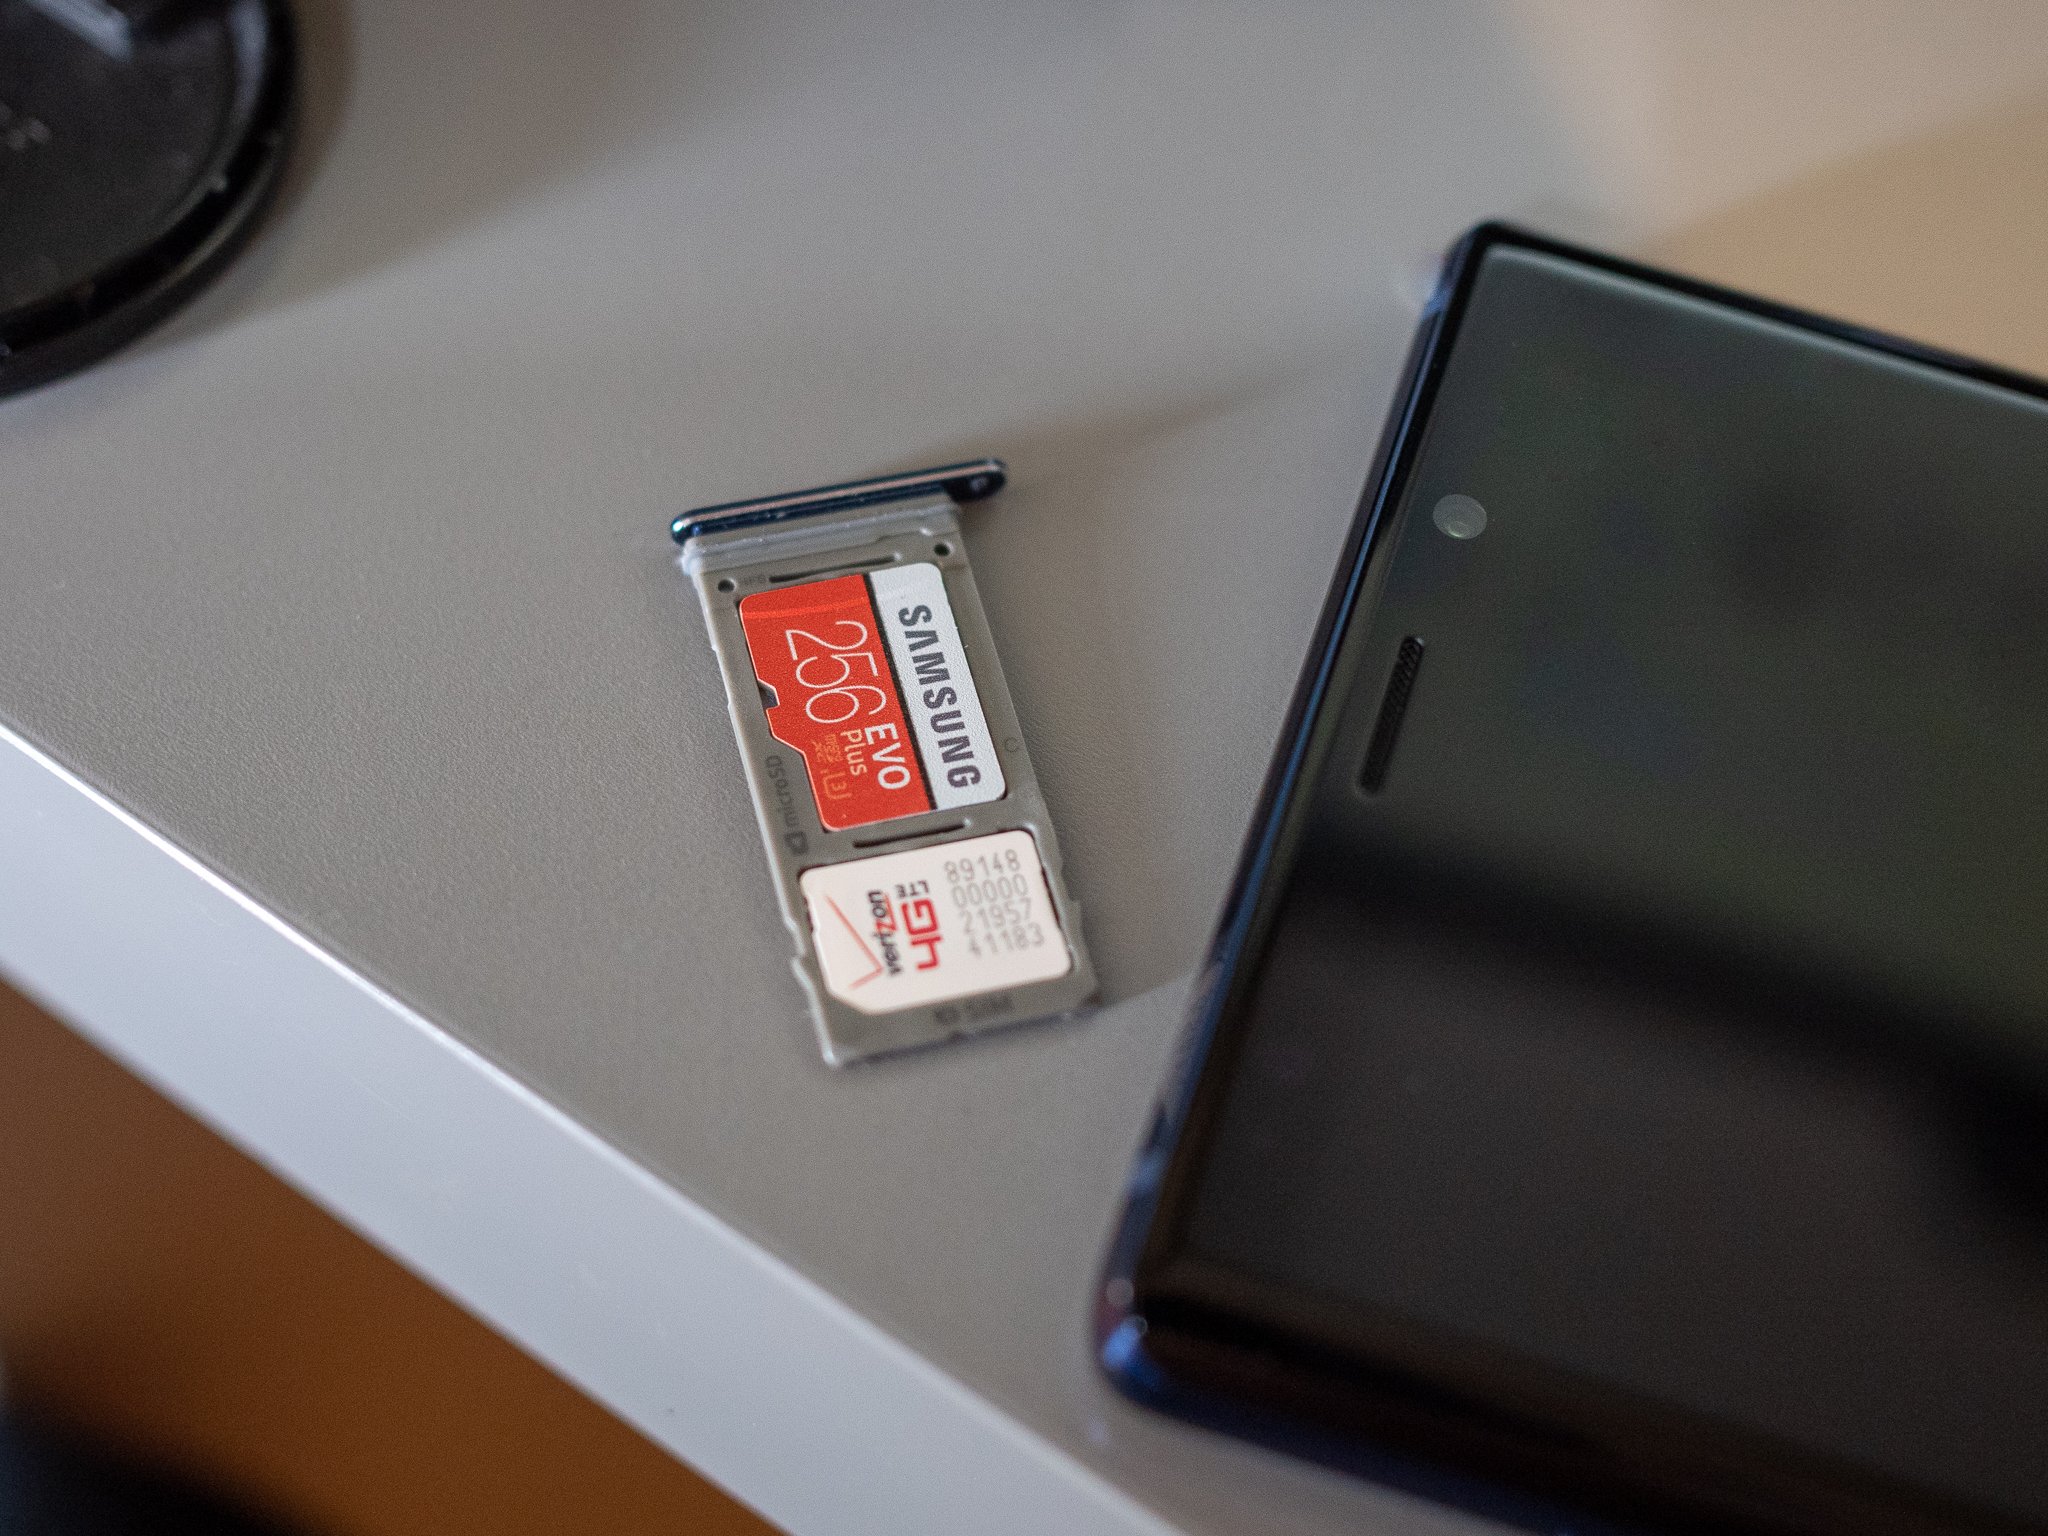 Galaxy Note 9 with a MicroSD card